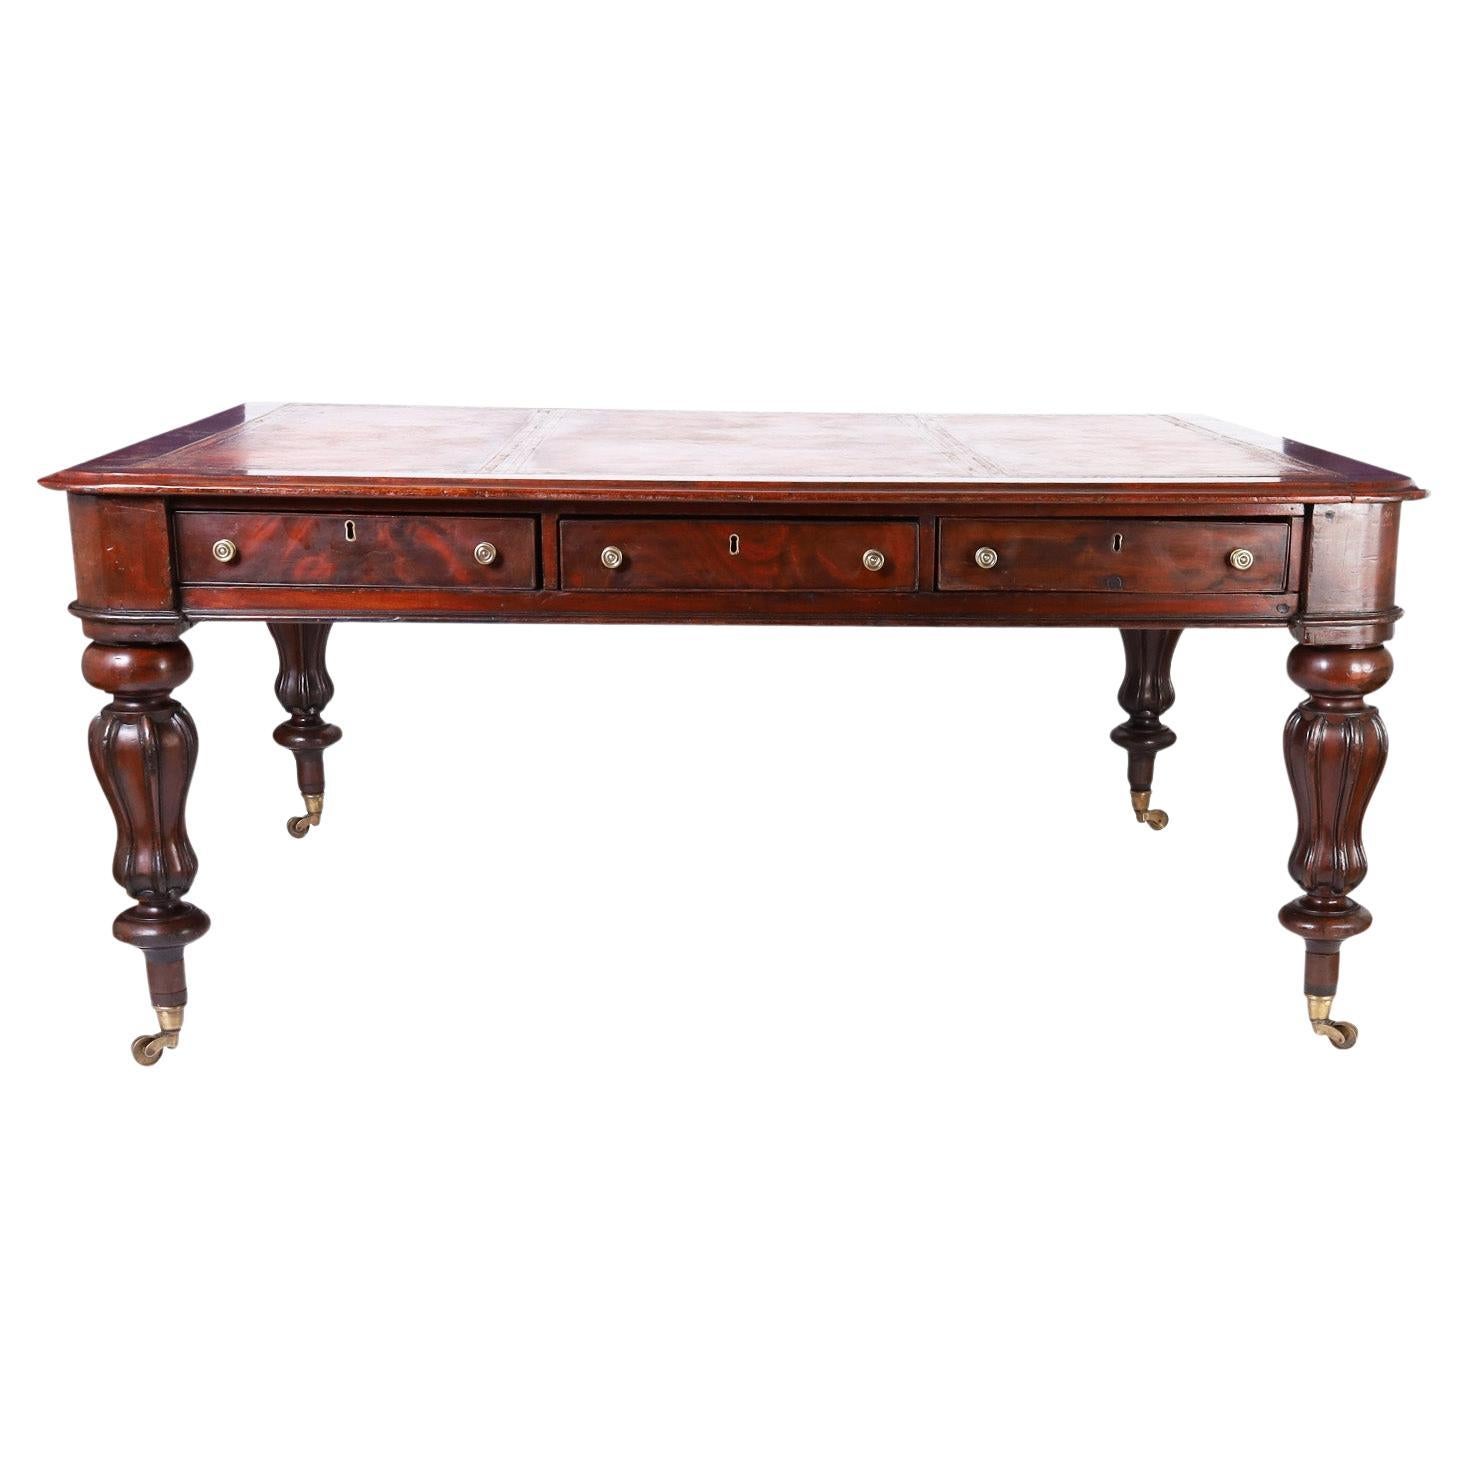 Impressive 19th century English partners desk, regency in style, crafted in mahogany having a tooled leather top on a case with three drawers on each side supported by dramatic turned and beaded legs on brass casters.